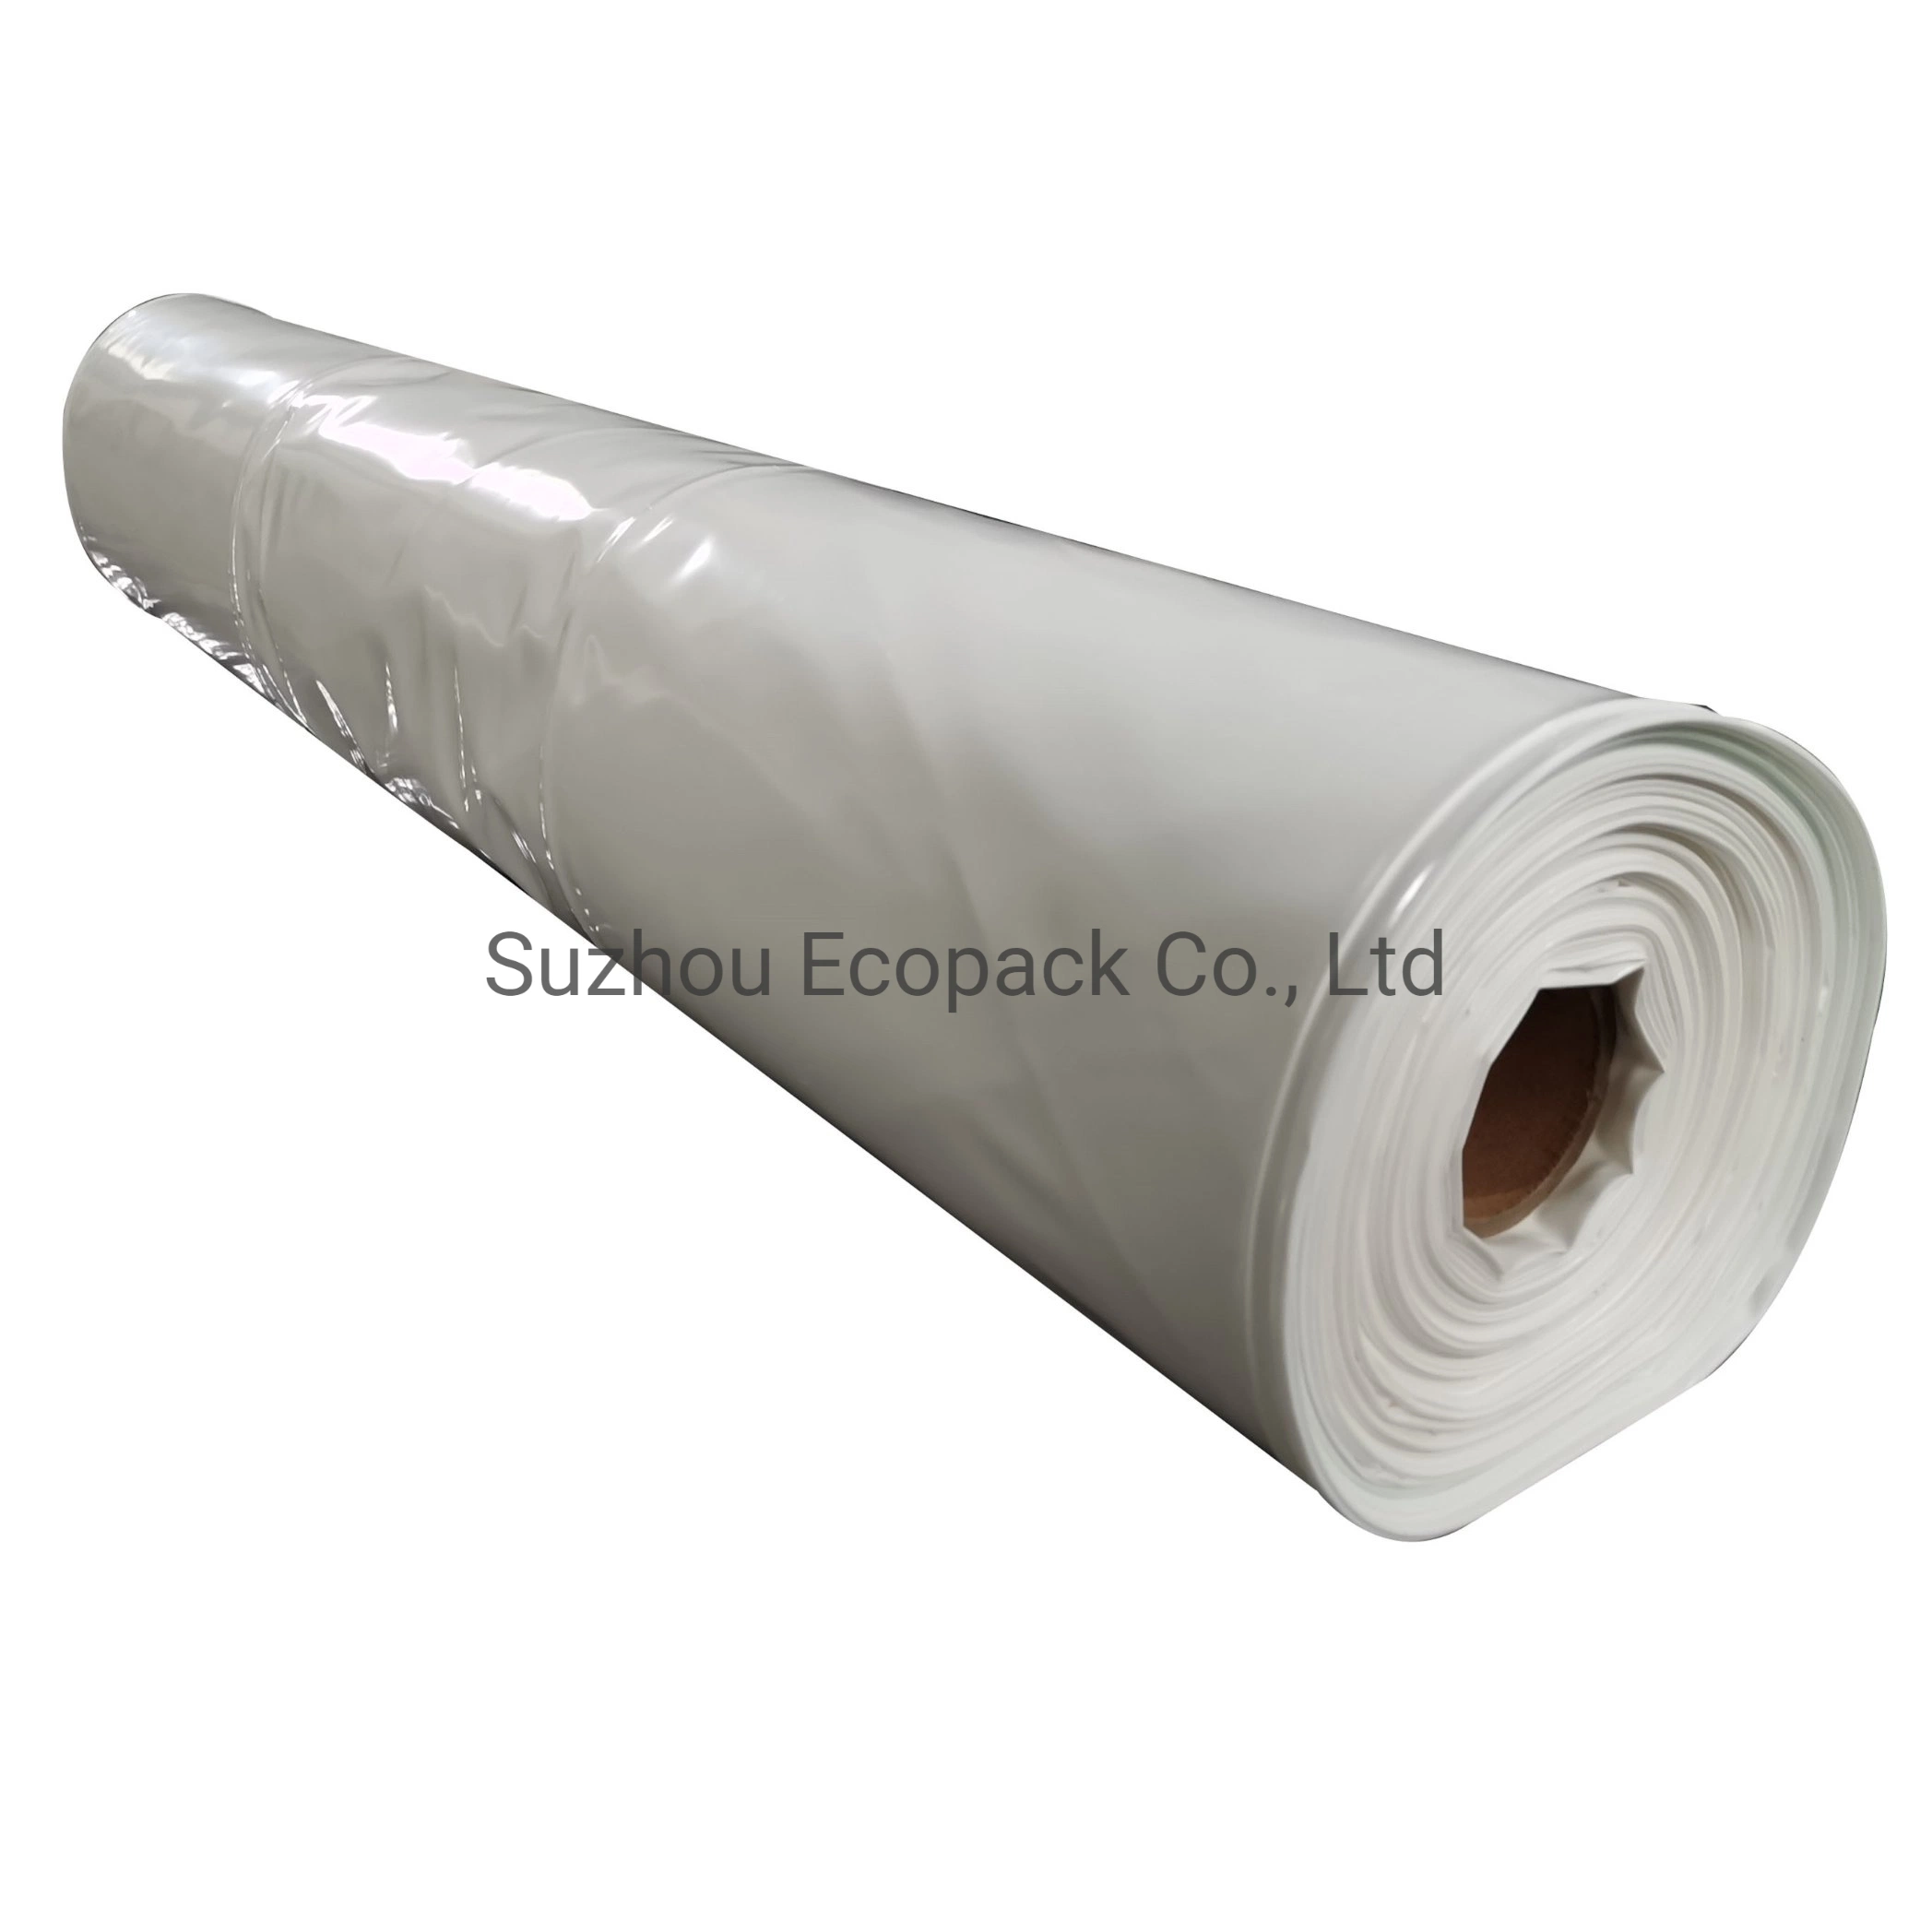 Temporary Shrink Wrap for Roofing and Building Construction Containment